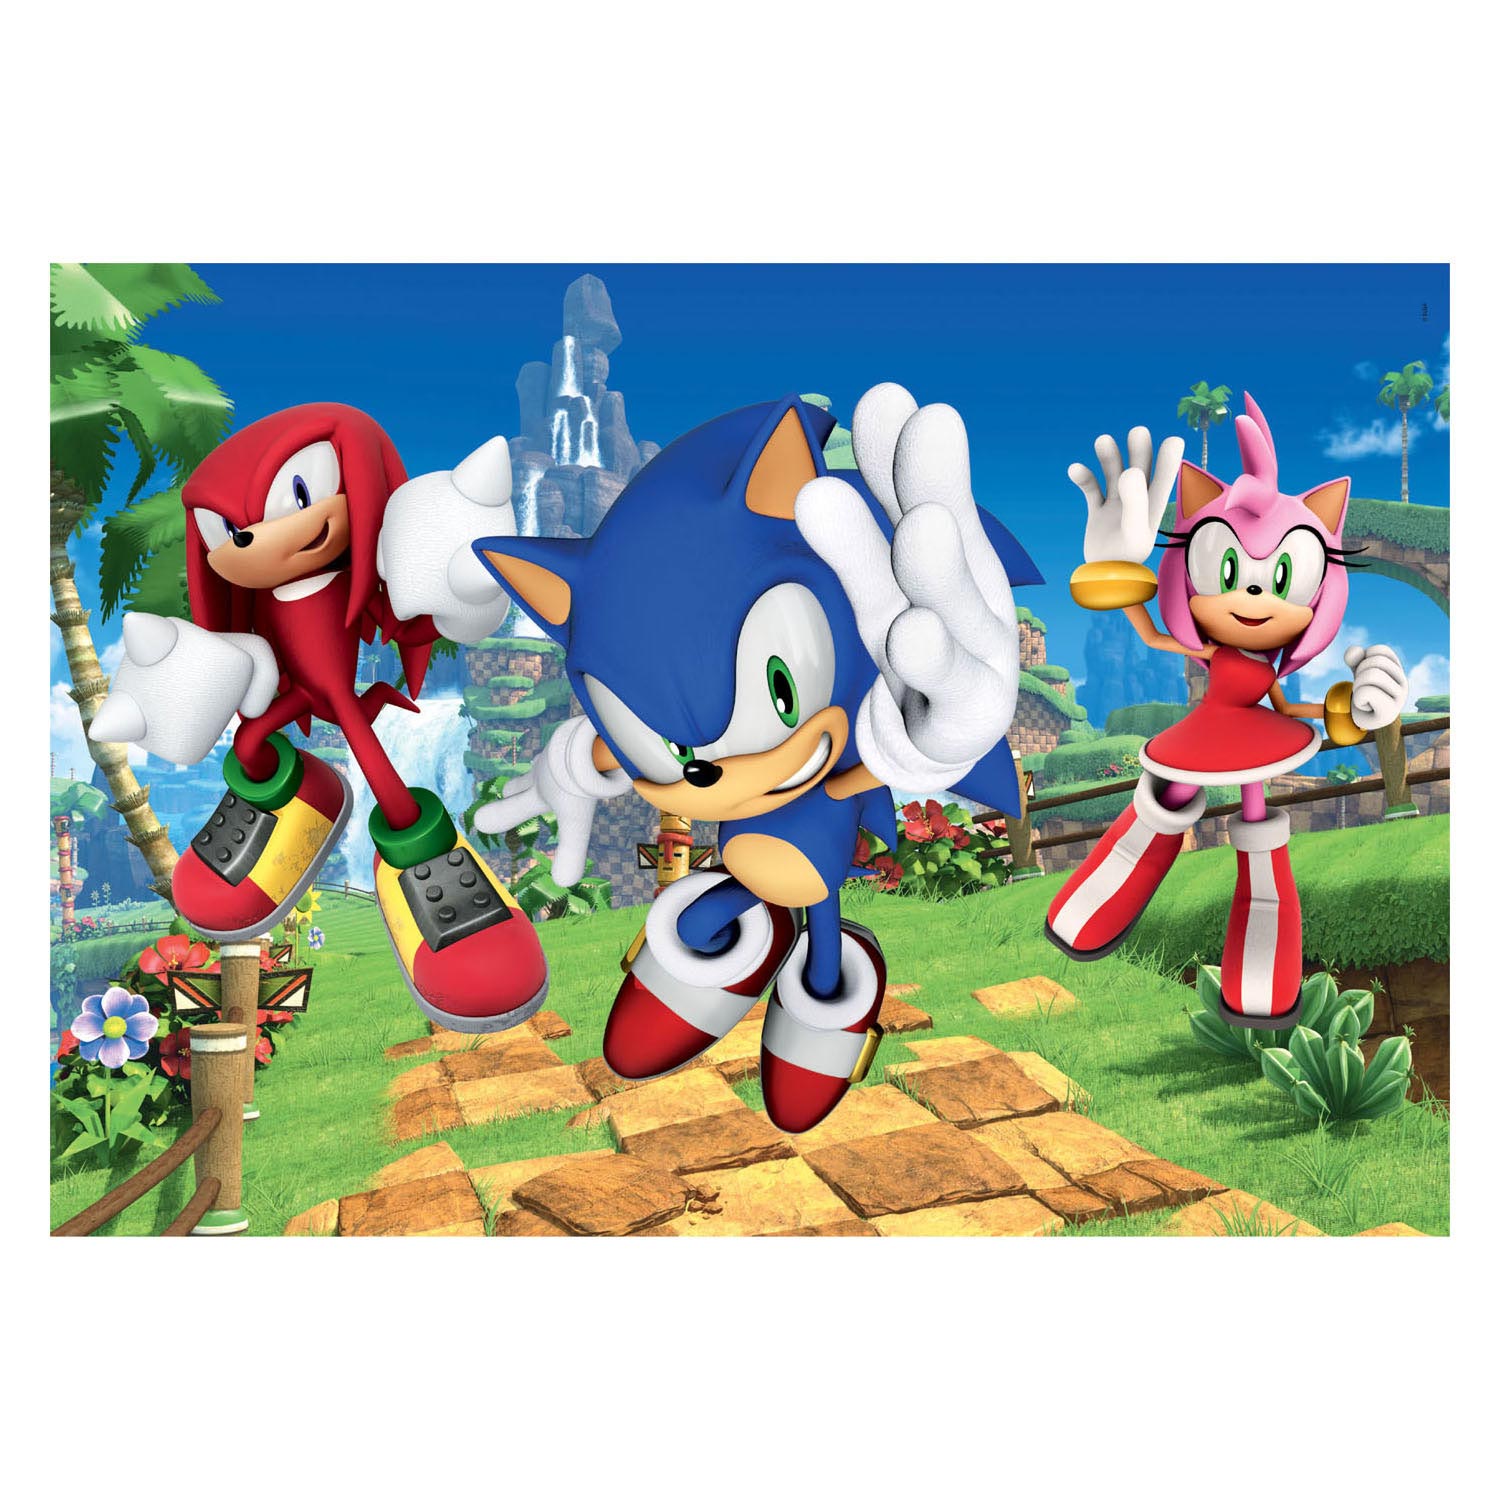 Sonic the Hedgehog Posterized Jigsaw Puzzle